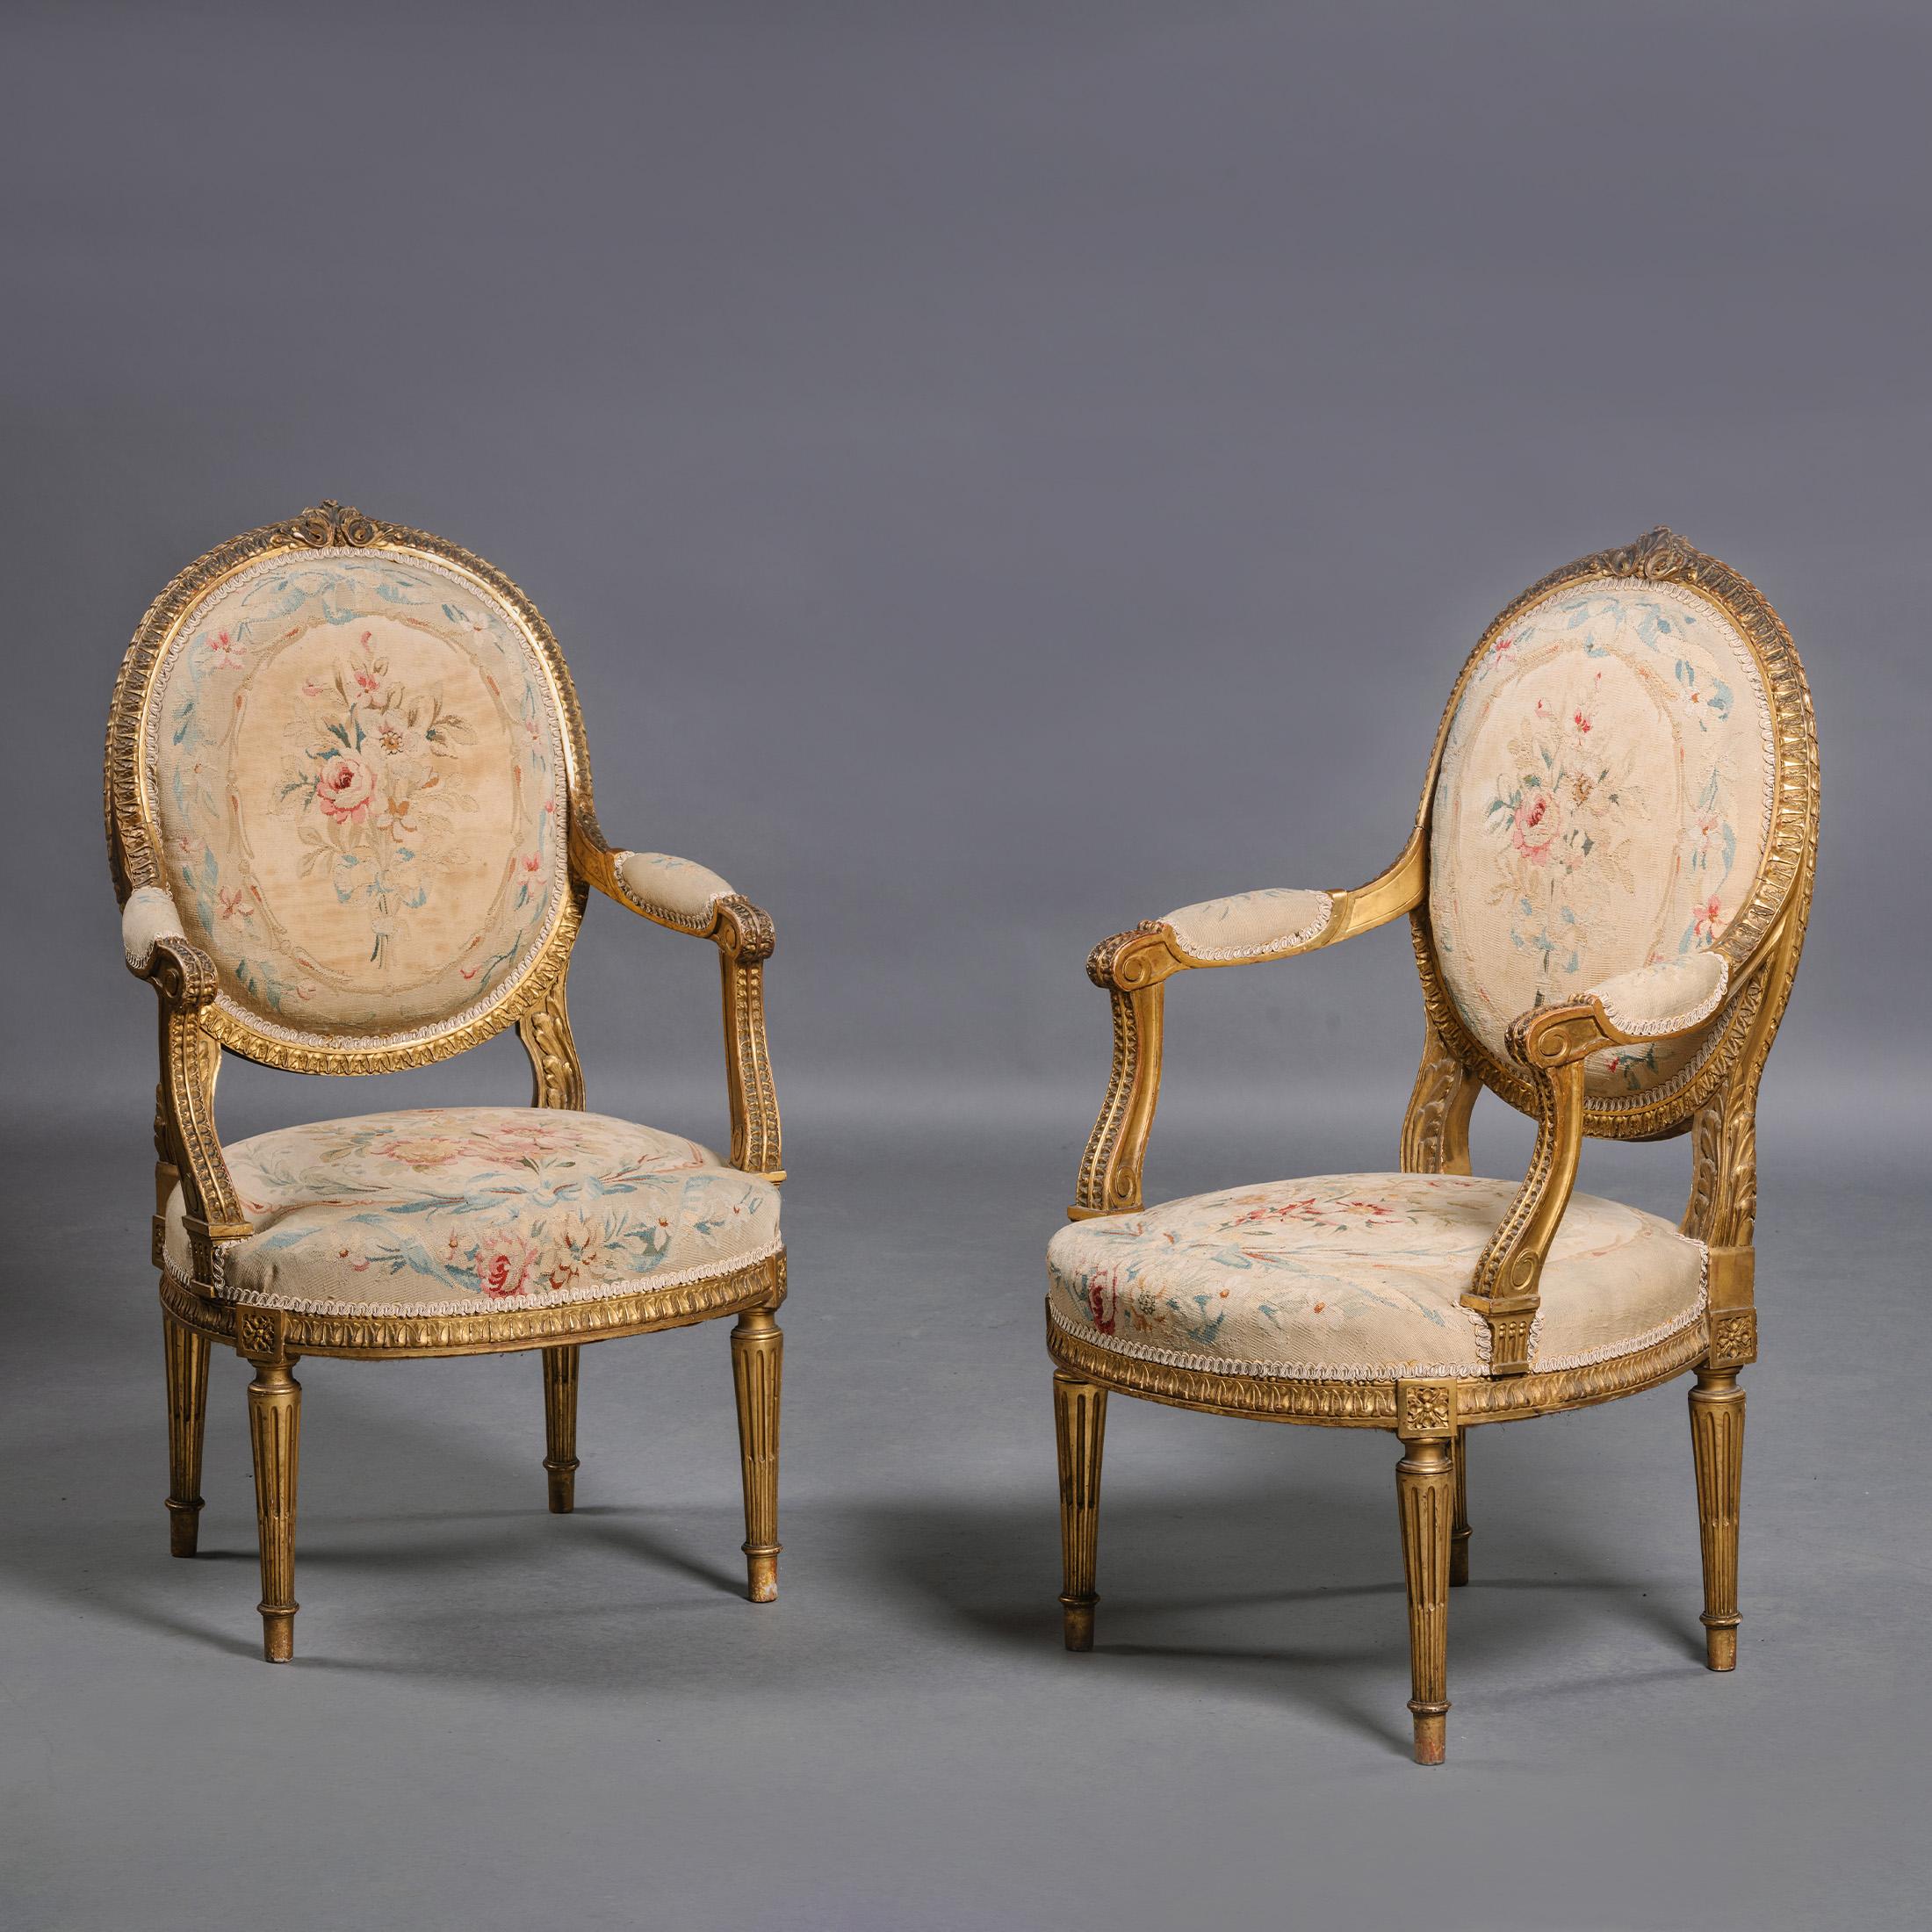 A Louis XVI Style Giltwood and Aubusson Tapestry Five-Piece Salon Suite In Good Condition For Sale In Brighton, West Sussex